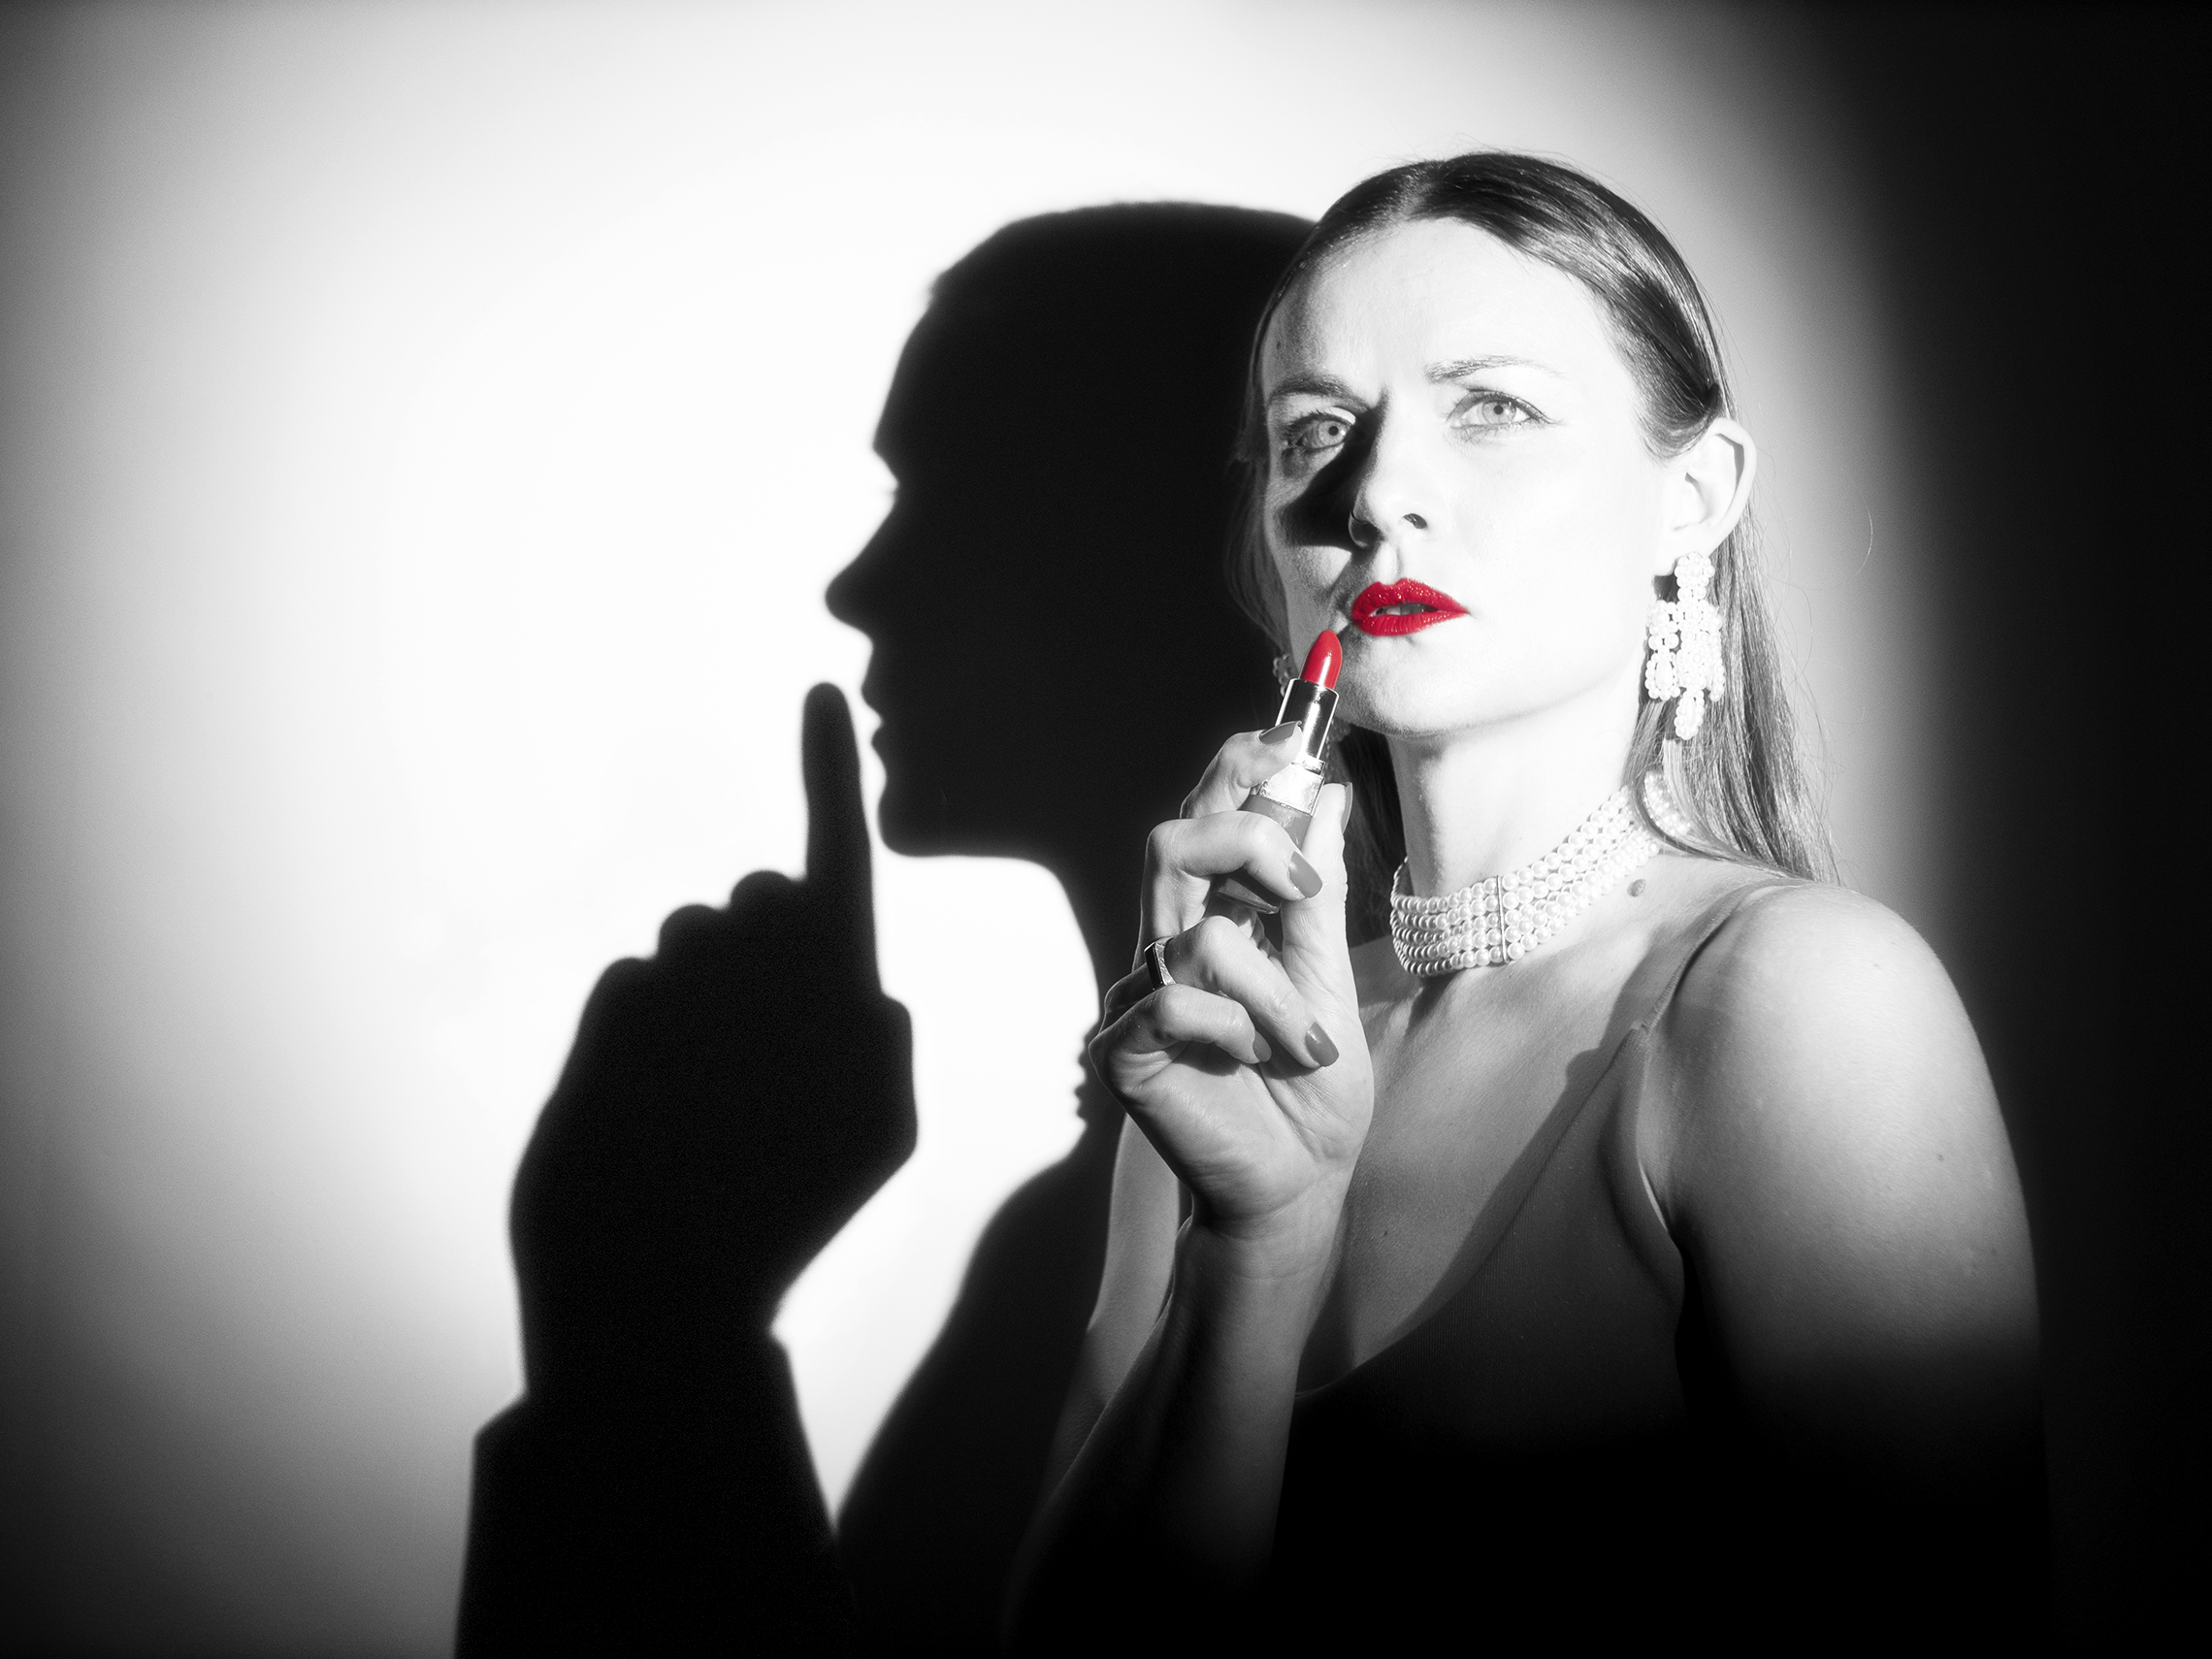 Production image from As SHE Likes It in black and white. A woman staring out of the image holding a bright red lipstick to her lips, the reflection looks like it's a gun